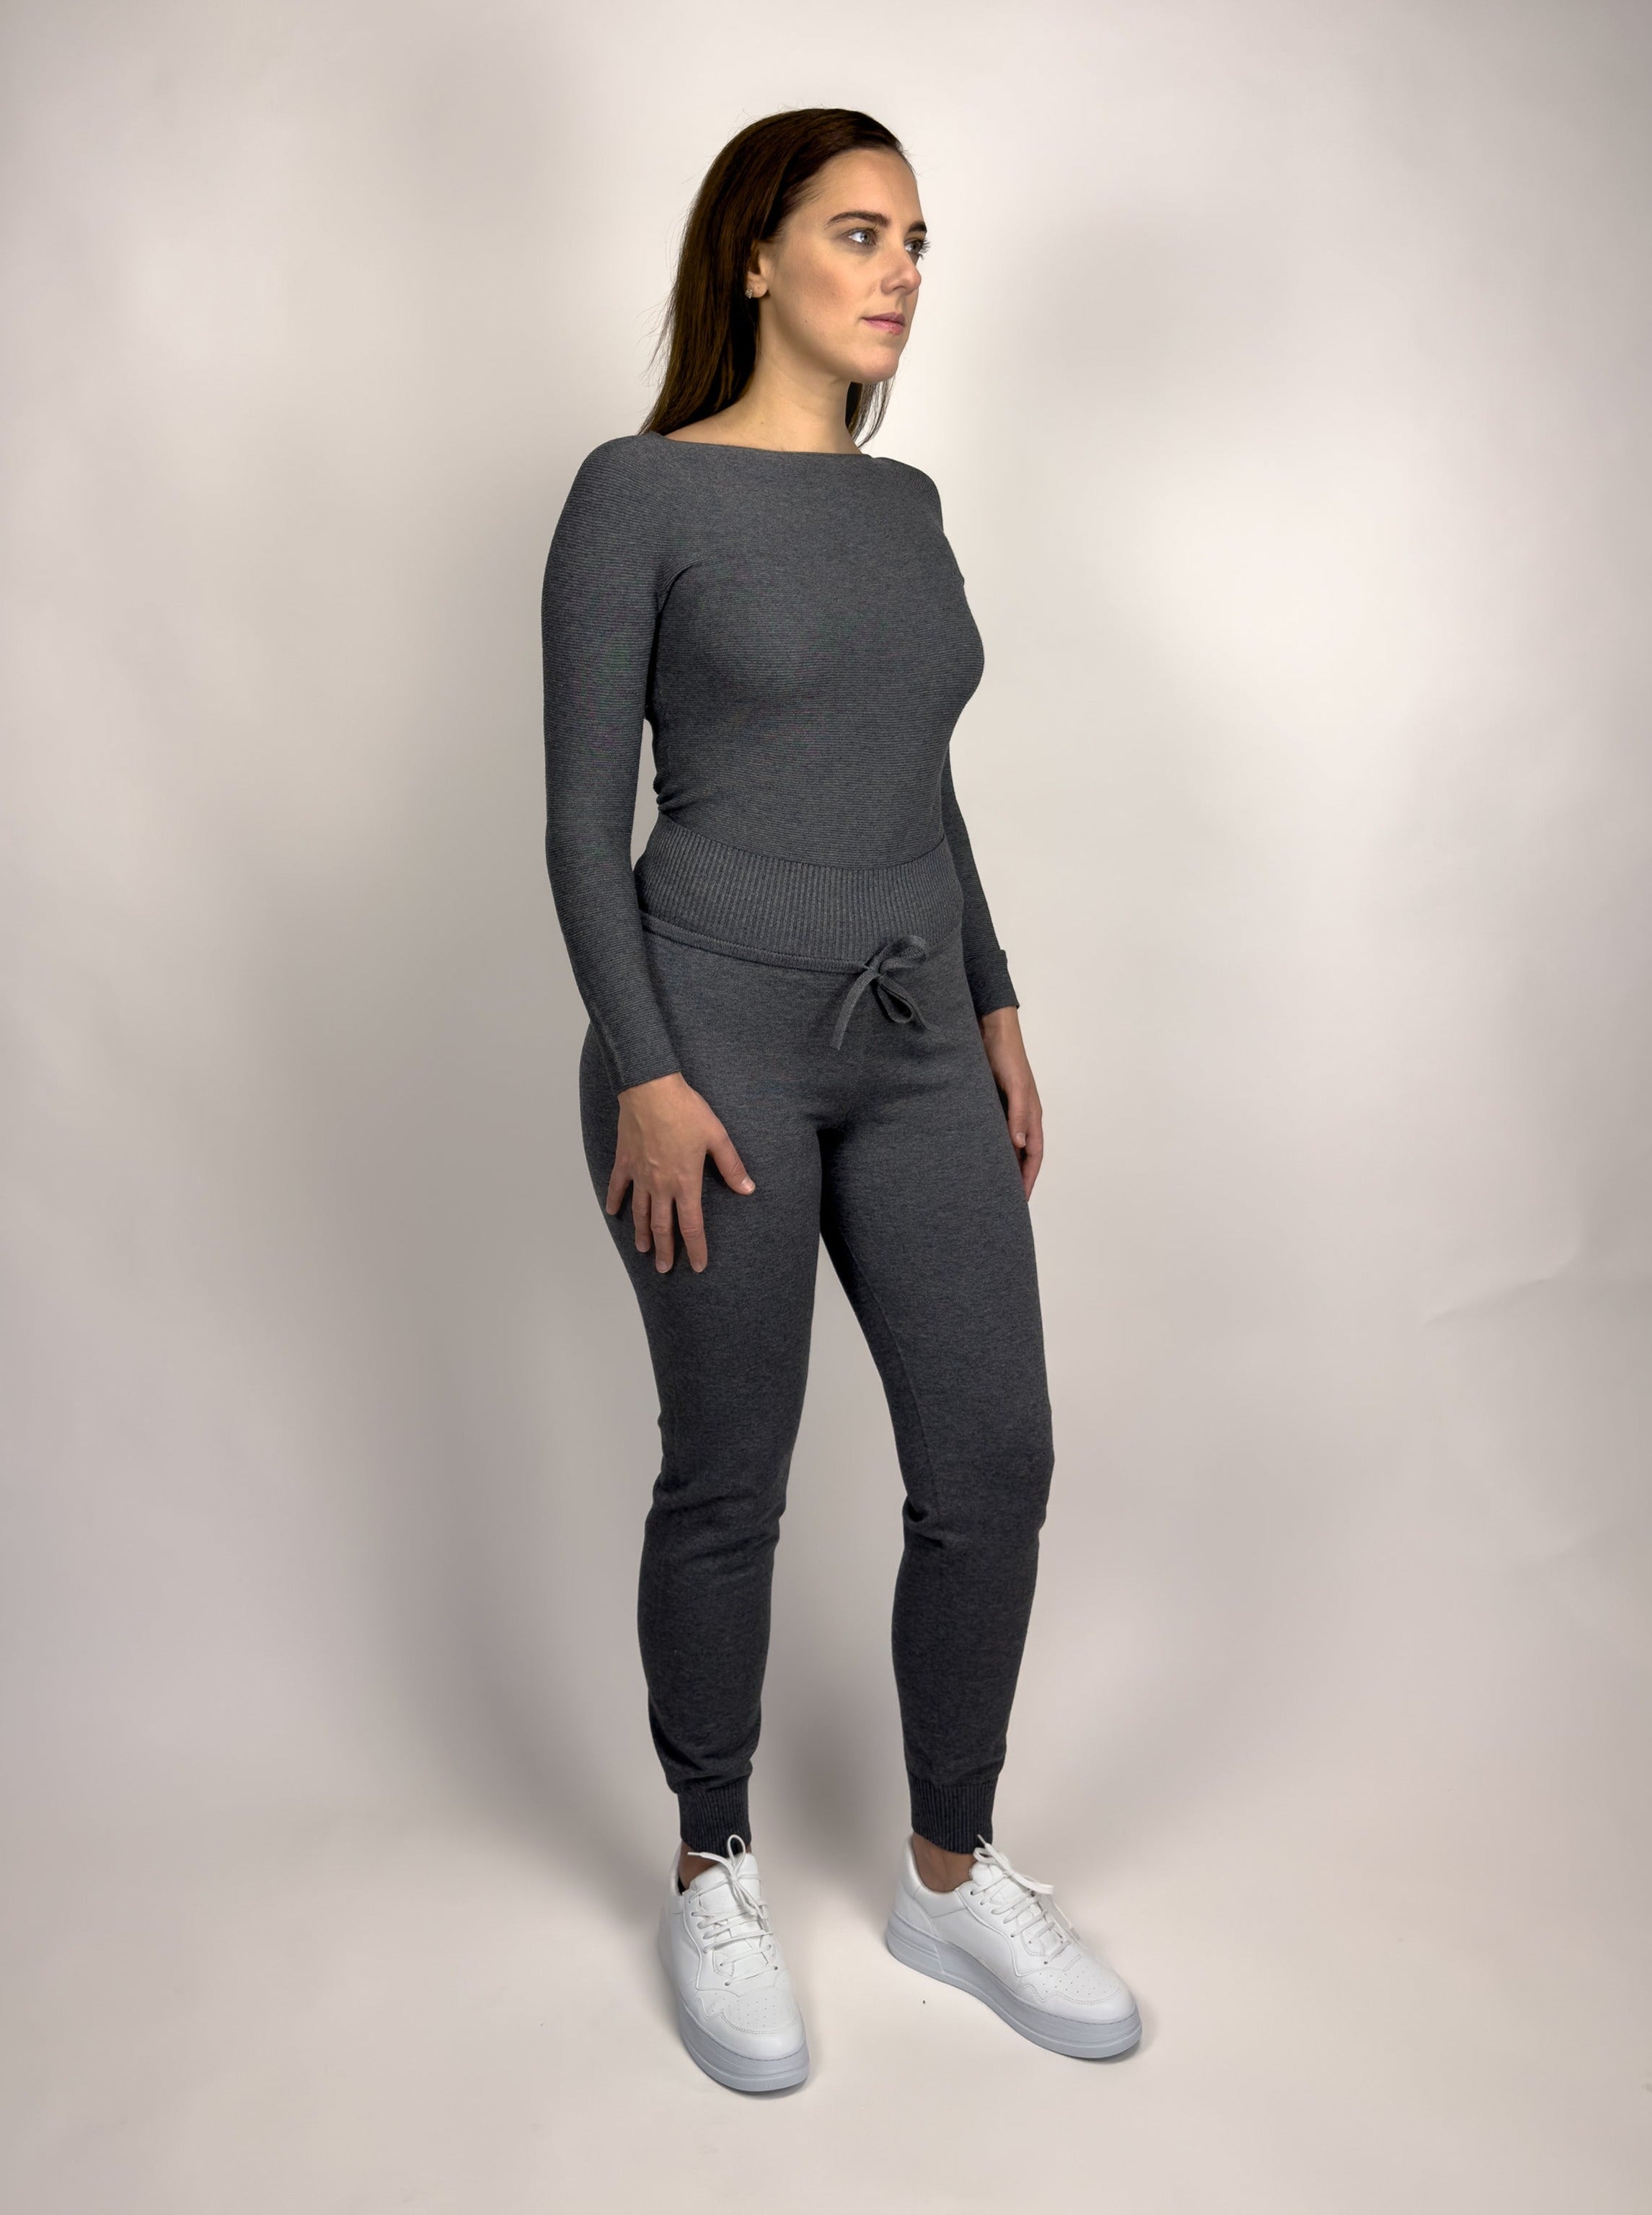 Charlotte High waist fitted viscose knit jogger